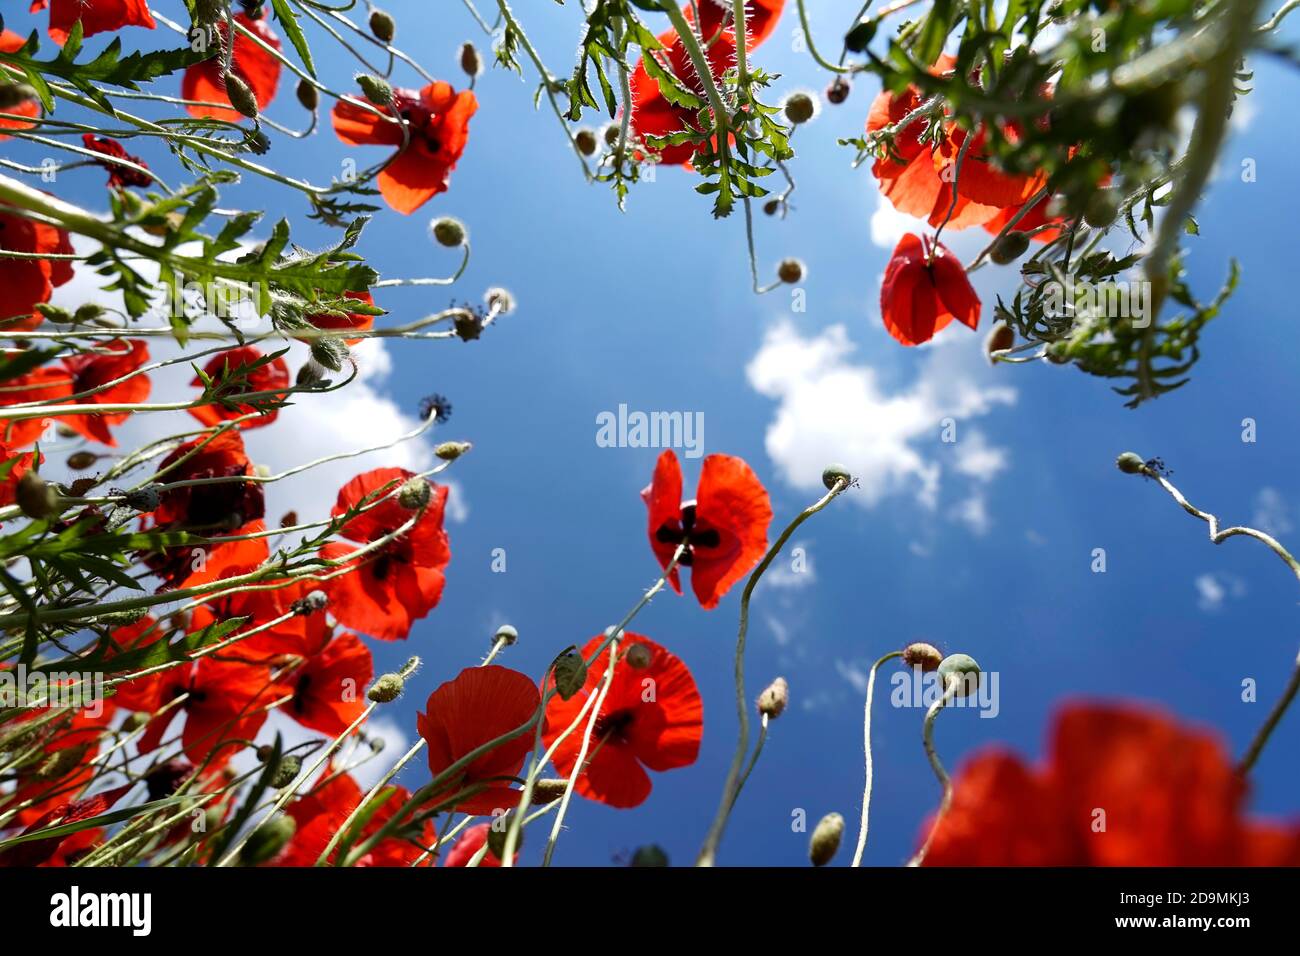 Germany, Bavaria, Upper Bavaria, Altötting district, poppies, corn poppies, Papaver rhoeas, taken from below against blue sky, low angle view Stock Photo